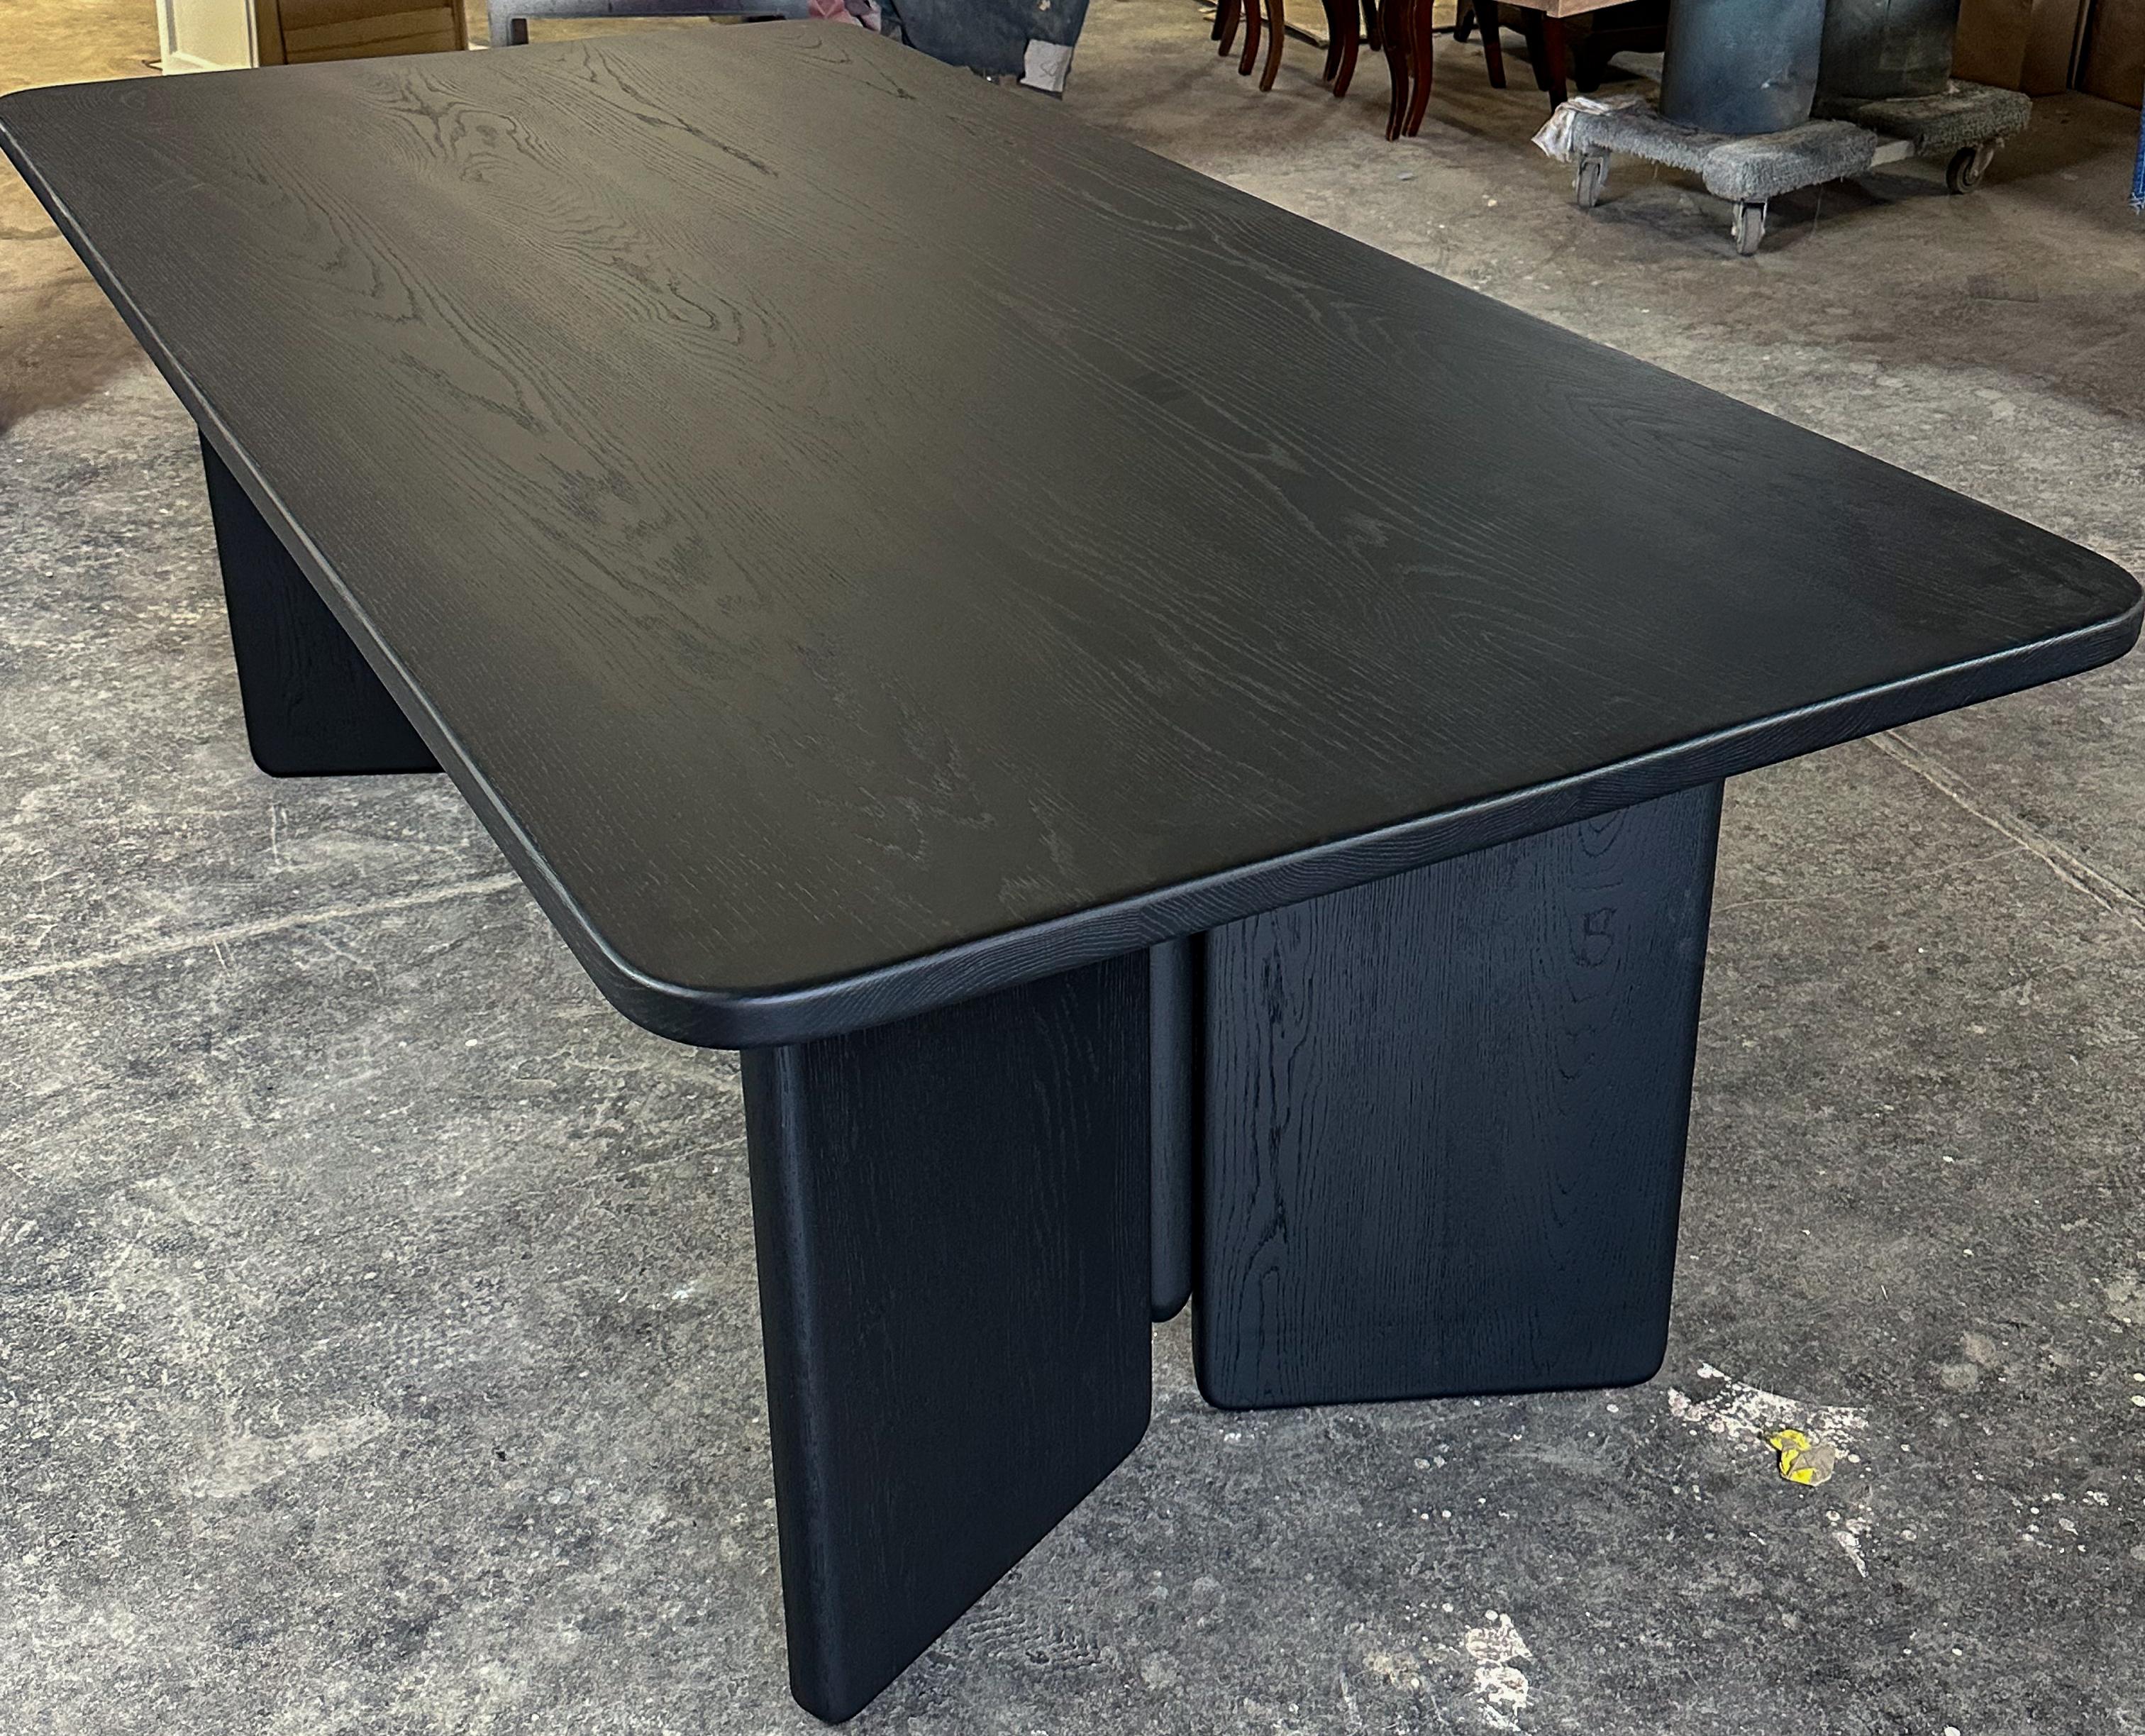 Custom rectangular dining table with two pedestal legs made in black matte brushed American oak.  Made in Los Angeles by Adesso Imports.
Can be done in different woods, finishes and sizes.